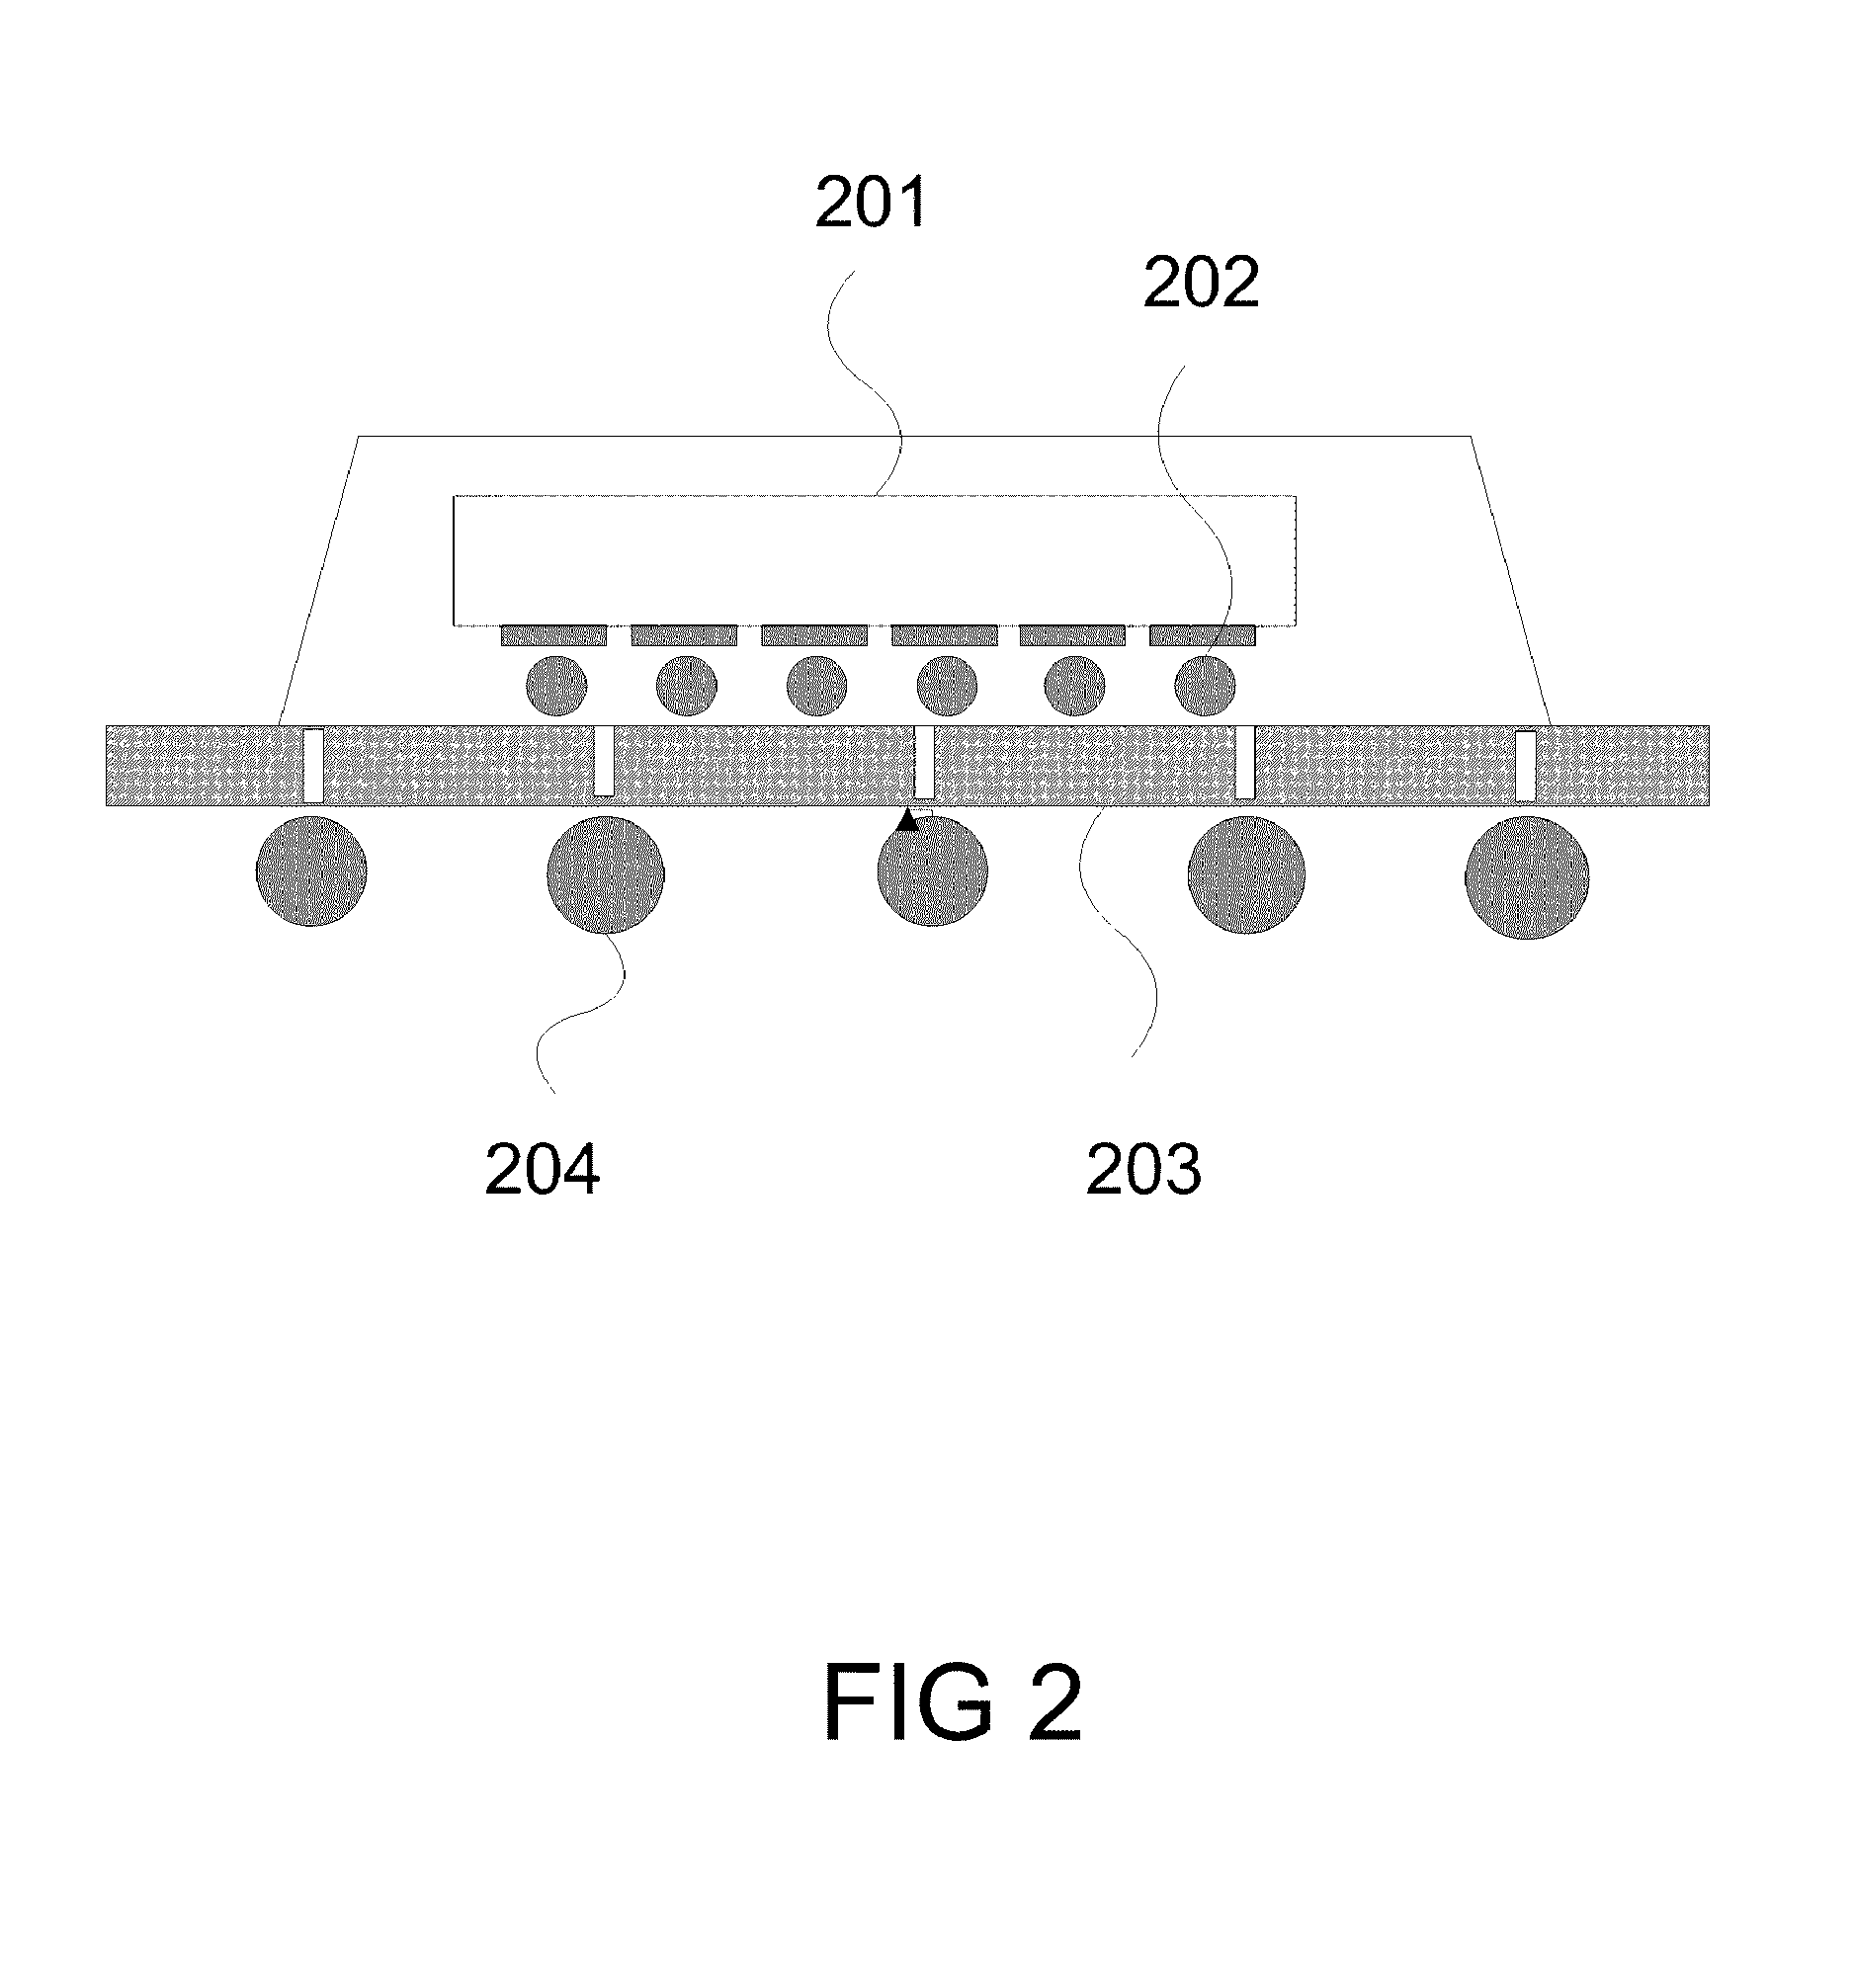 Stacking integrated circuits containing serializer and deserializer blocks using through silicon via